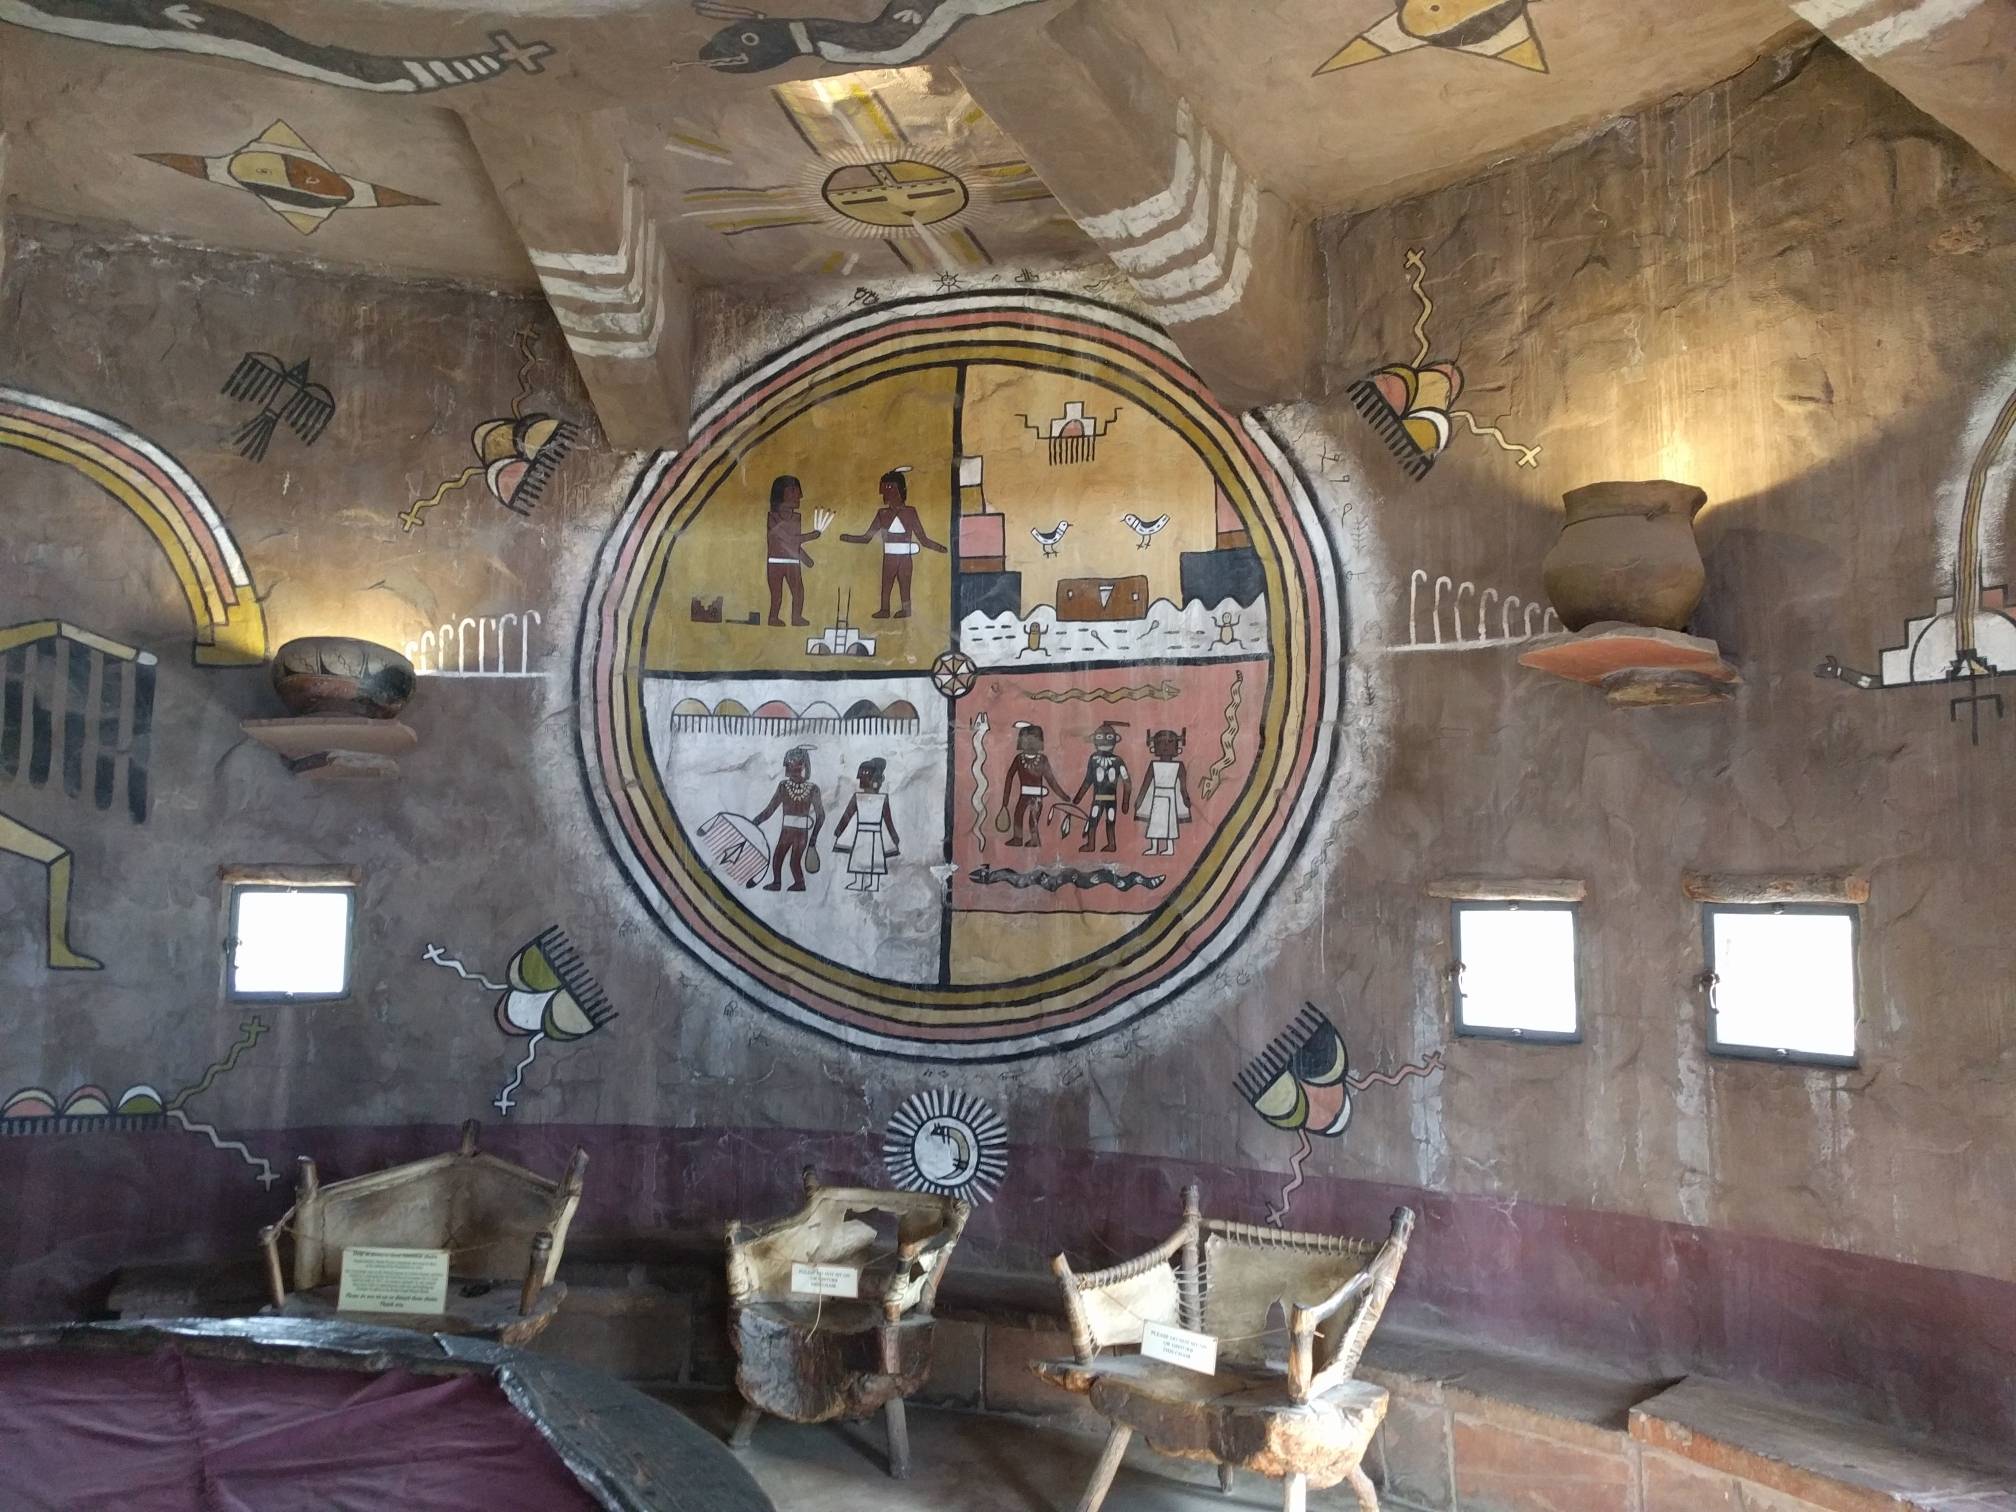 Image: The interior of the Desert View watchtower